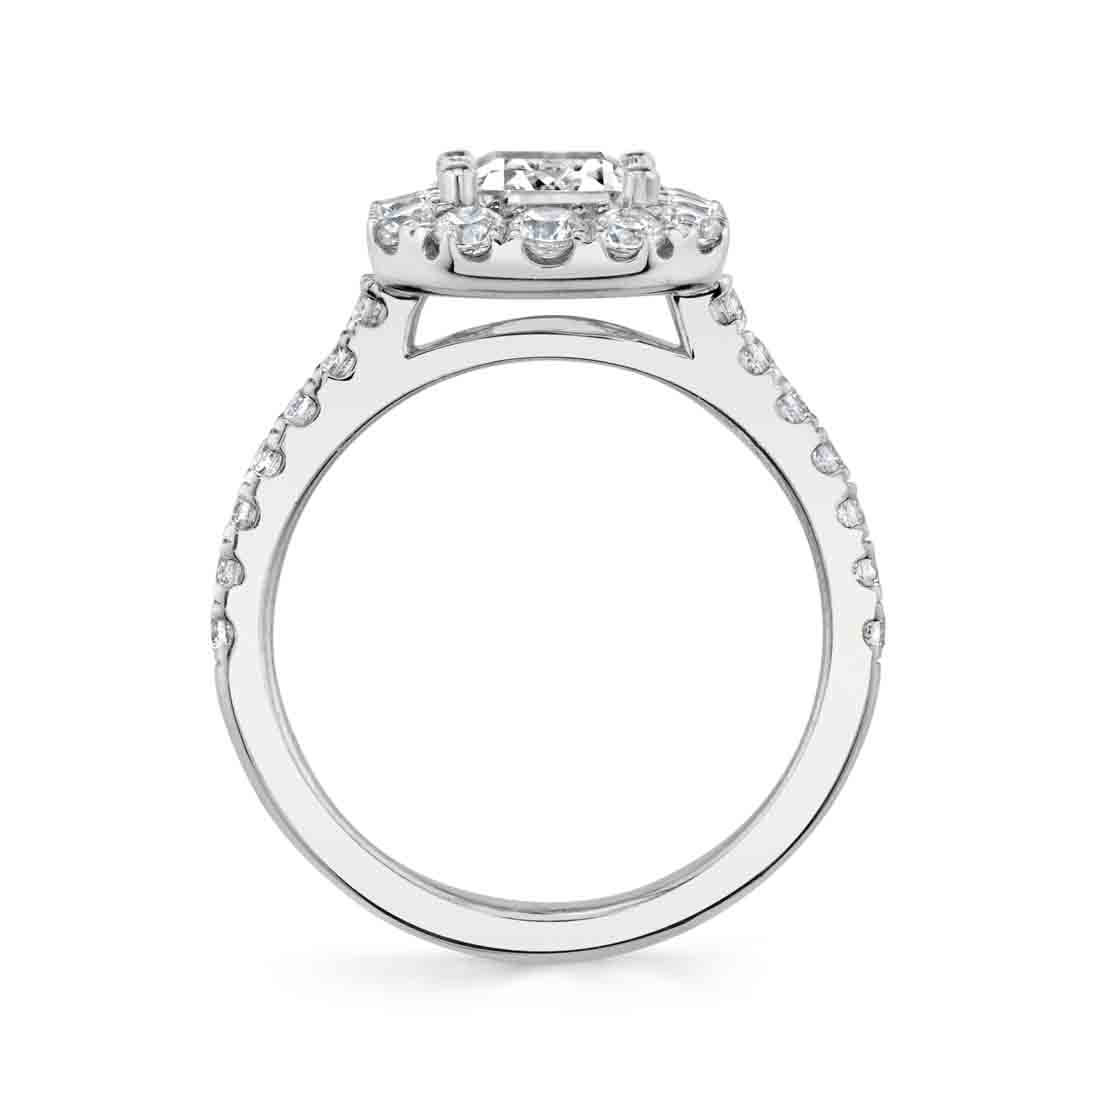 Profile Image of an Emerald Cut Engagement Ring with halo